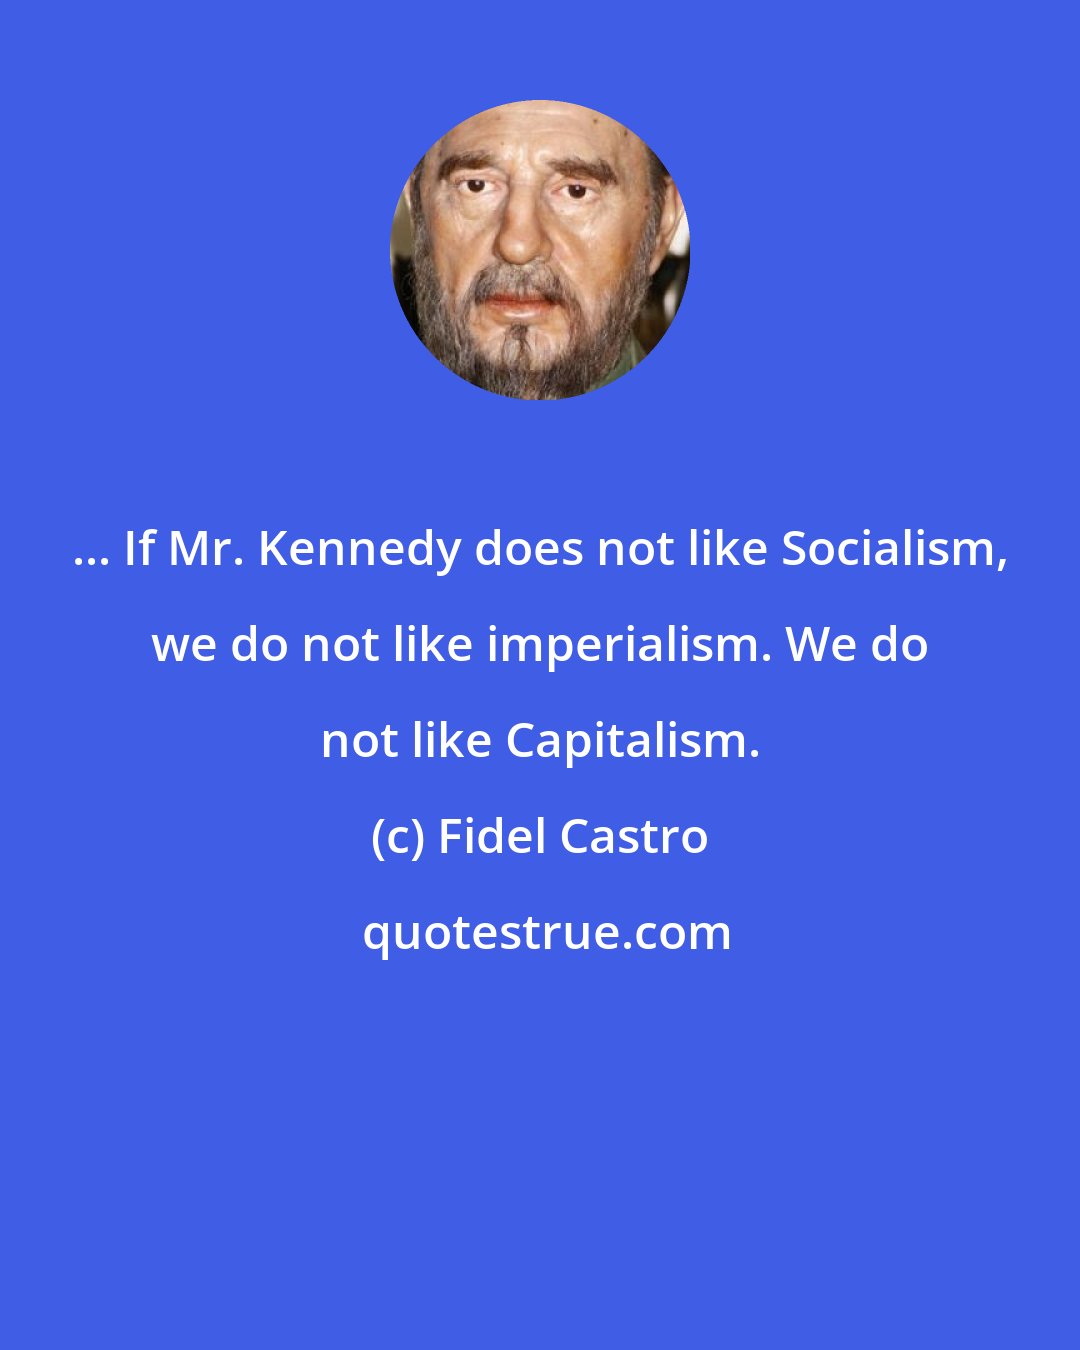 Fidel Castro: ... If Mr. Kennedy does not like Socialism, we do not like imperialism. We do not like Capitalism.